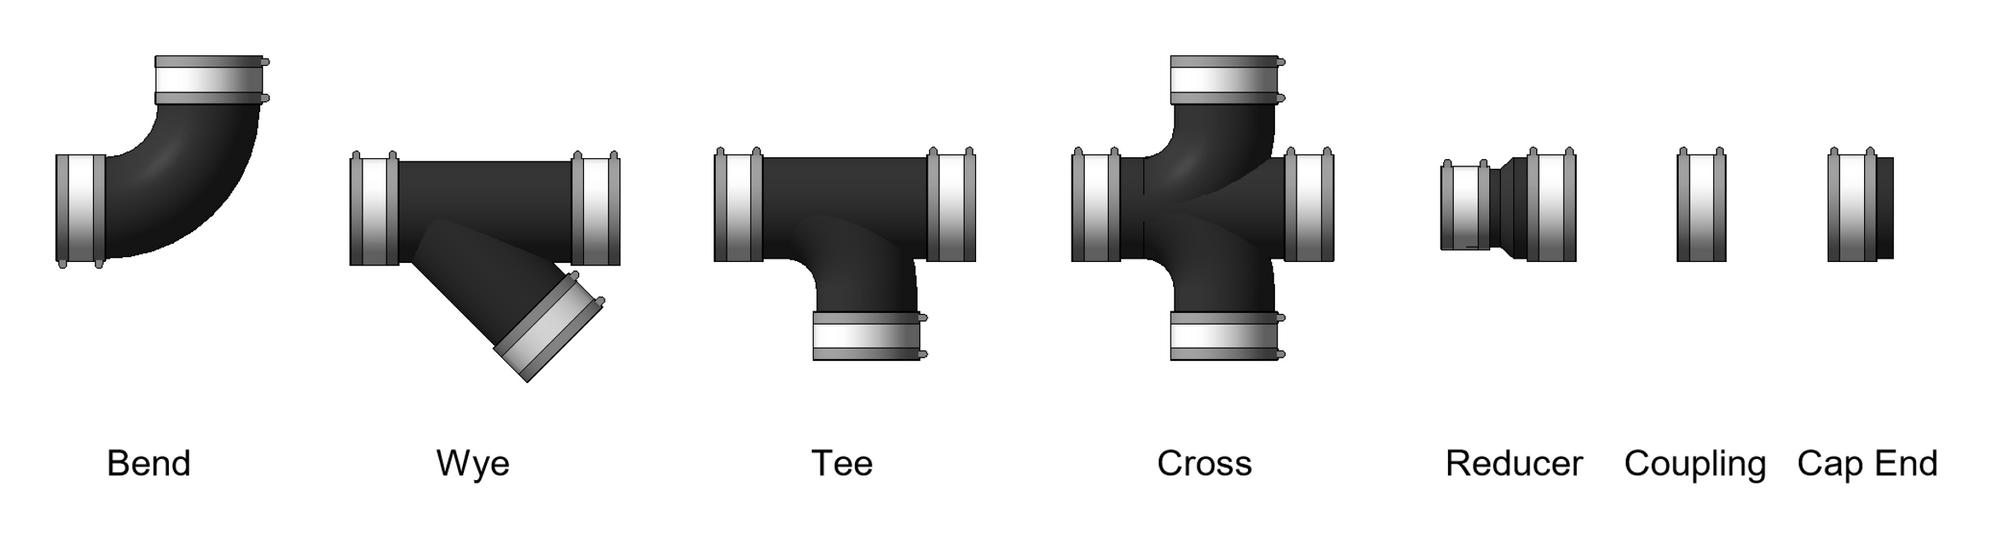 Revit image showing pipe fittings available in collection.